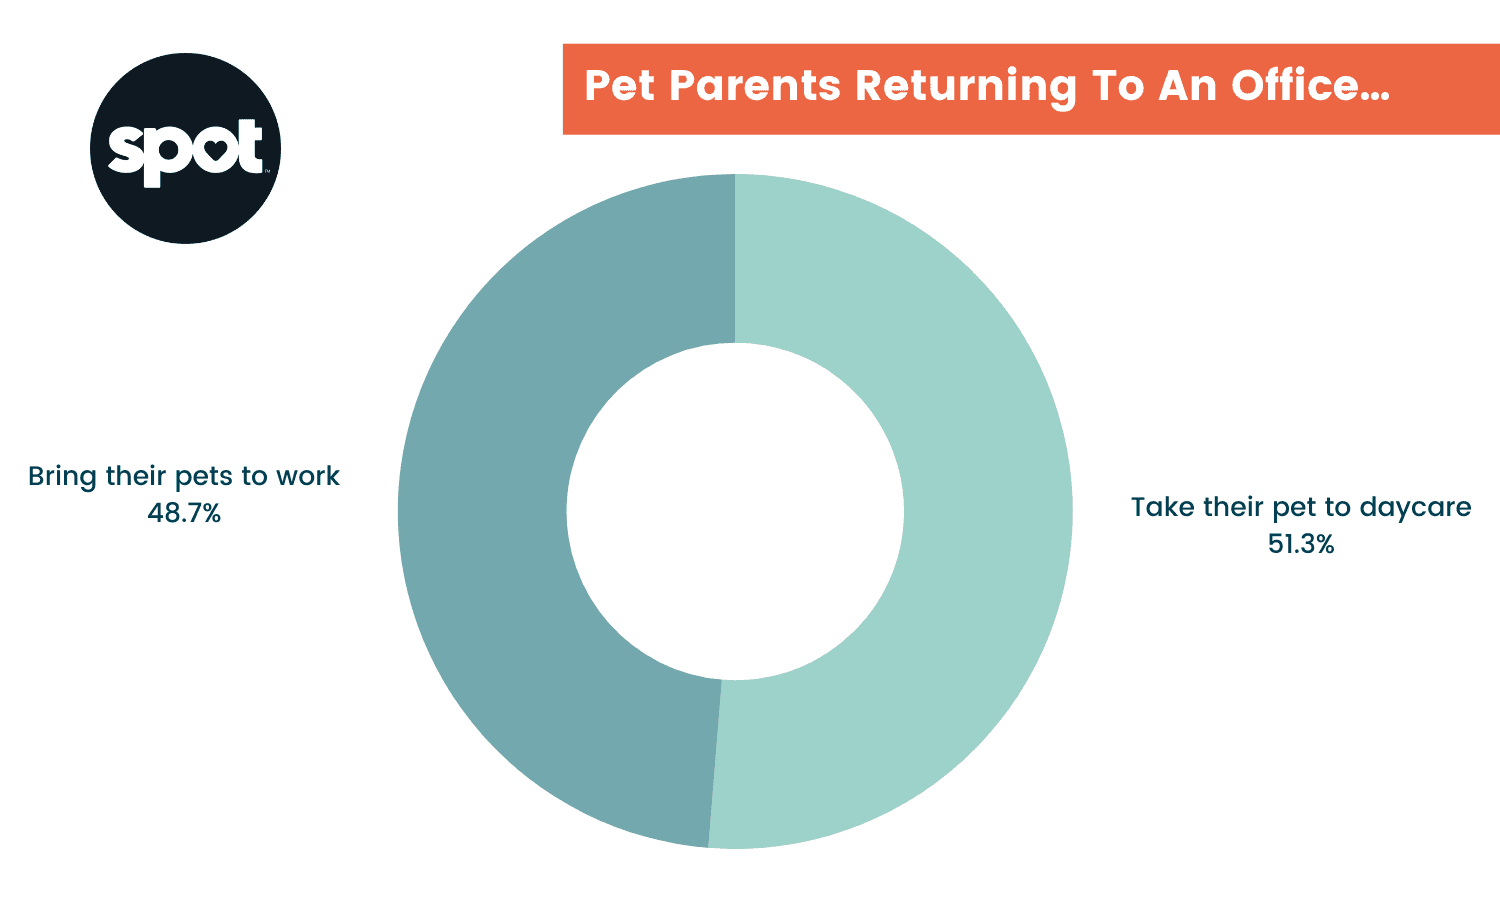 A pie chart shows that 48.7% of pet parents bring their pets to work while 51.3% take them to daycare when returning to an office.